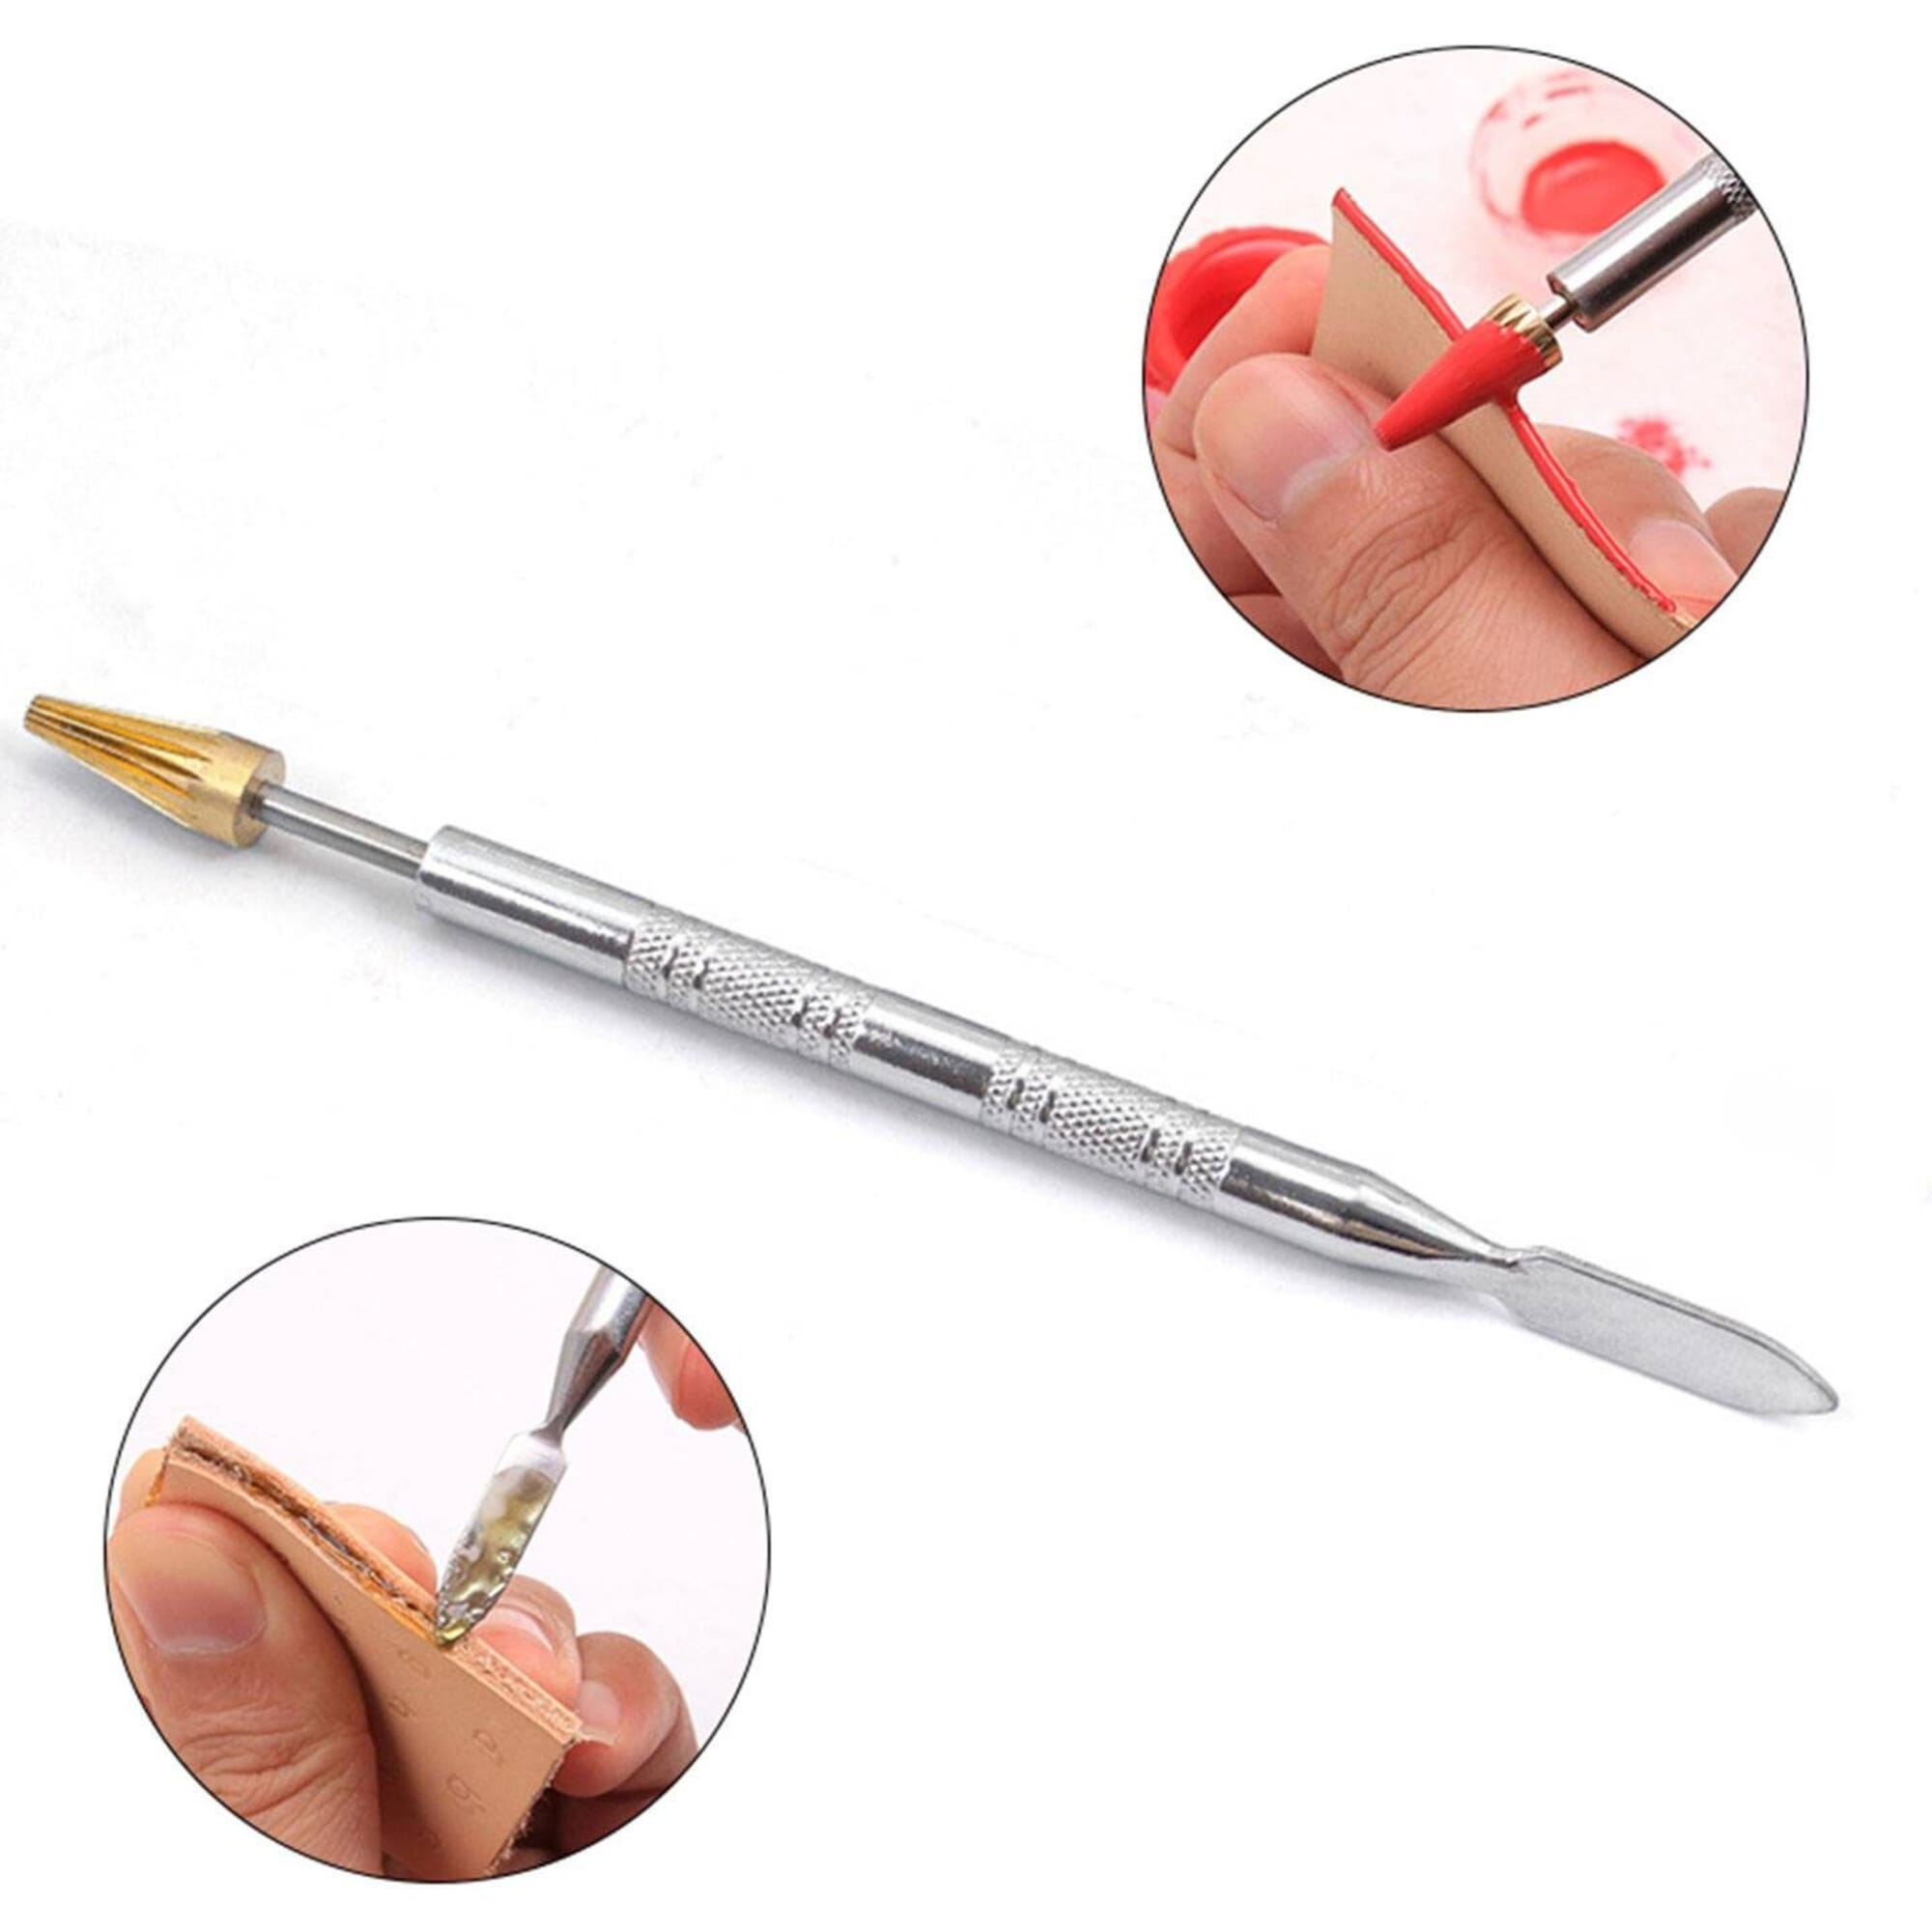 Edge Painting Pen Tool Colorful Hand Dye Paint Handcraft Oil Edger  Leathercraft Leather Treatment – LeatherMob